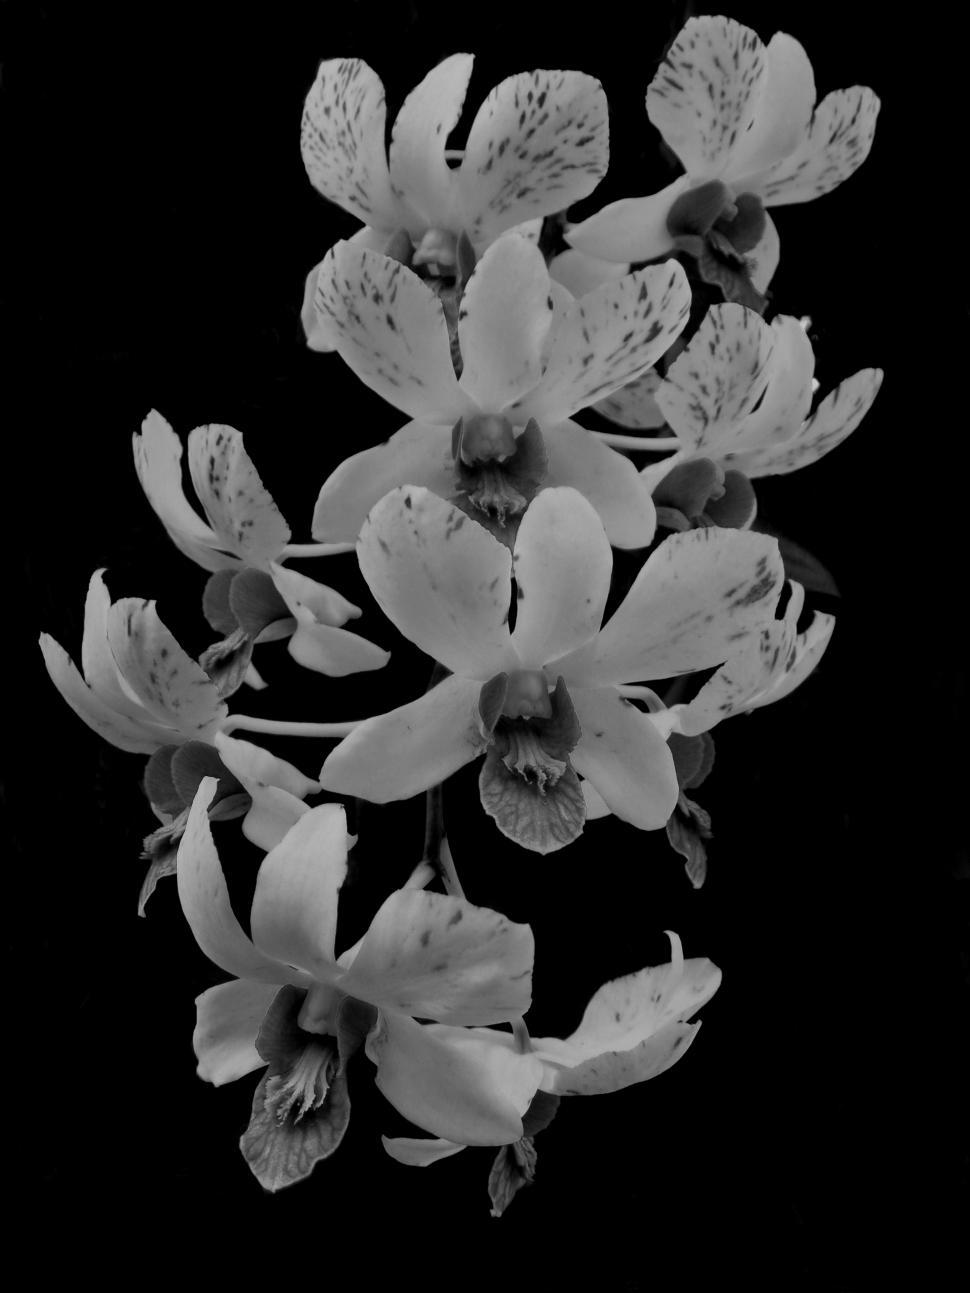 Free Image of Orchids Black and White 